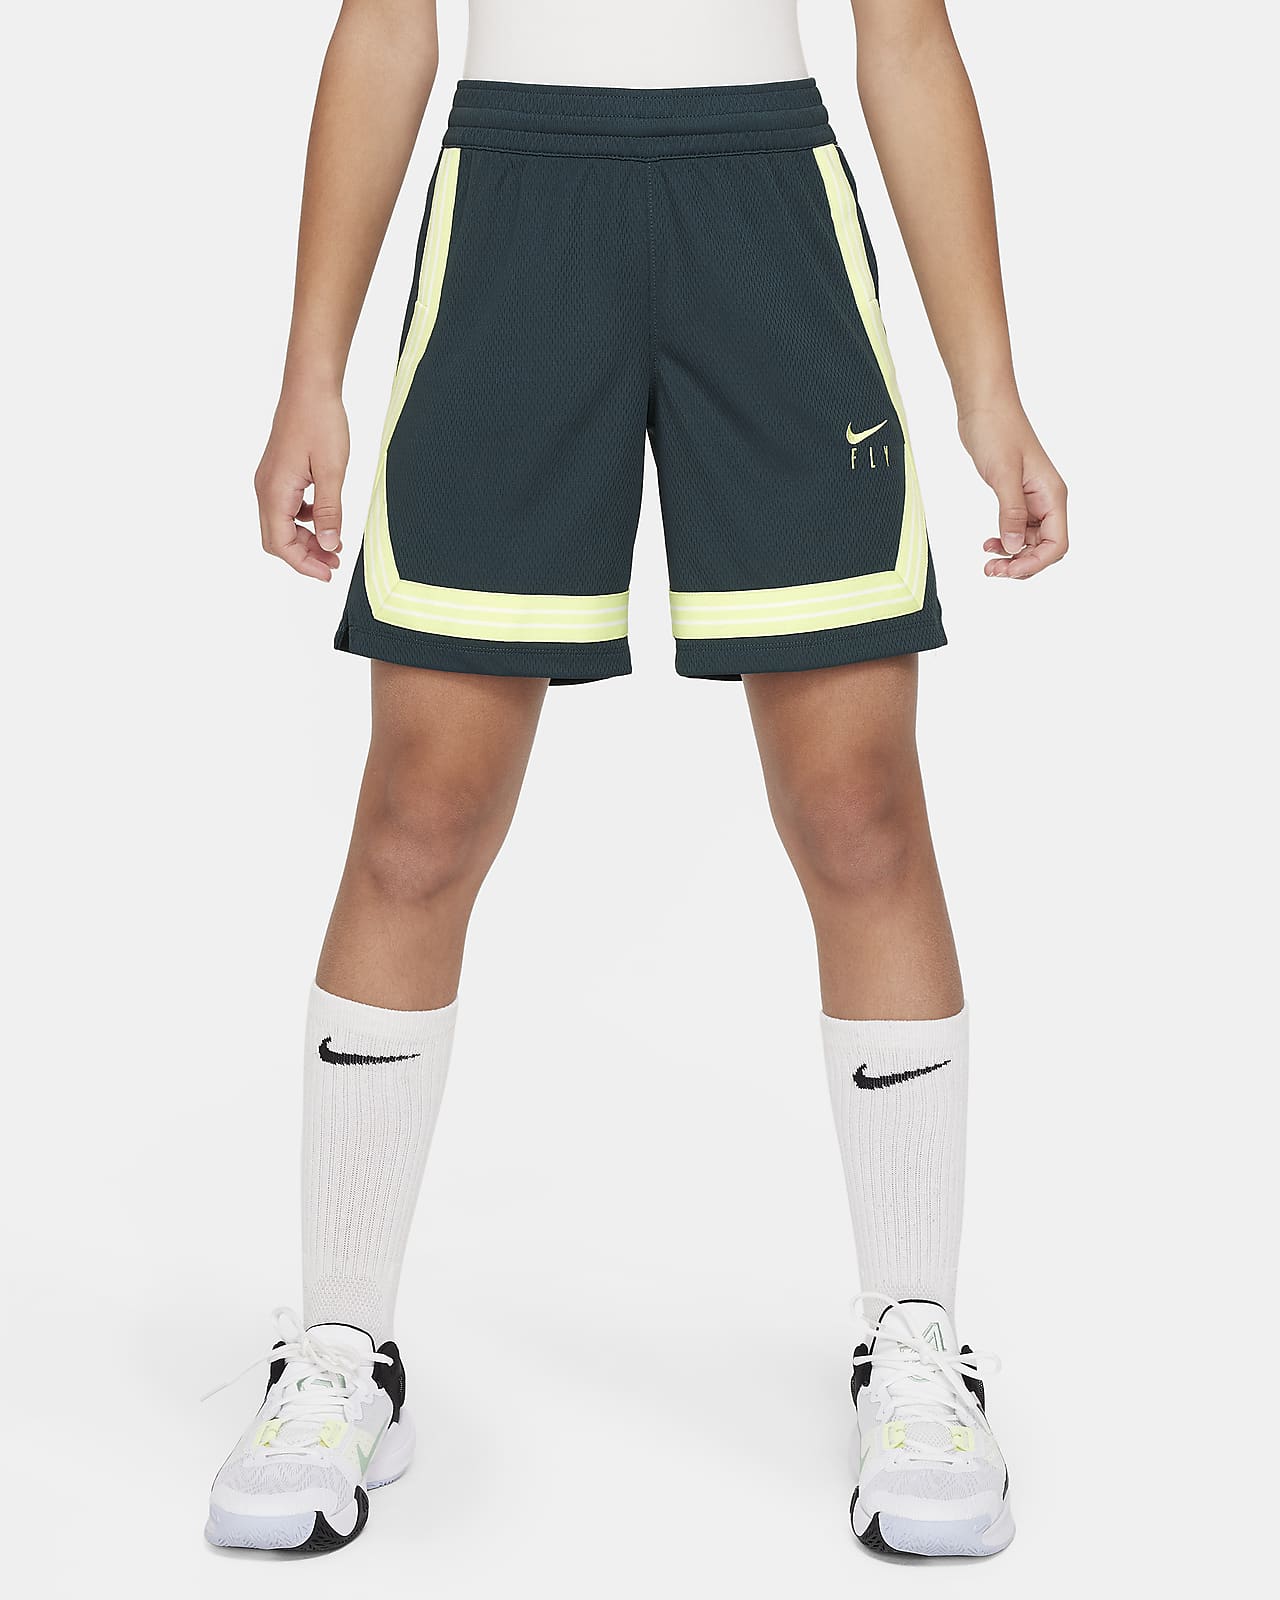 Nike Basketball Dri-FIT Crossover shorts in white